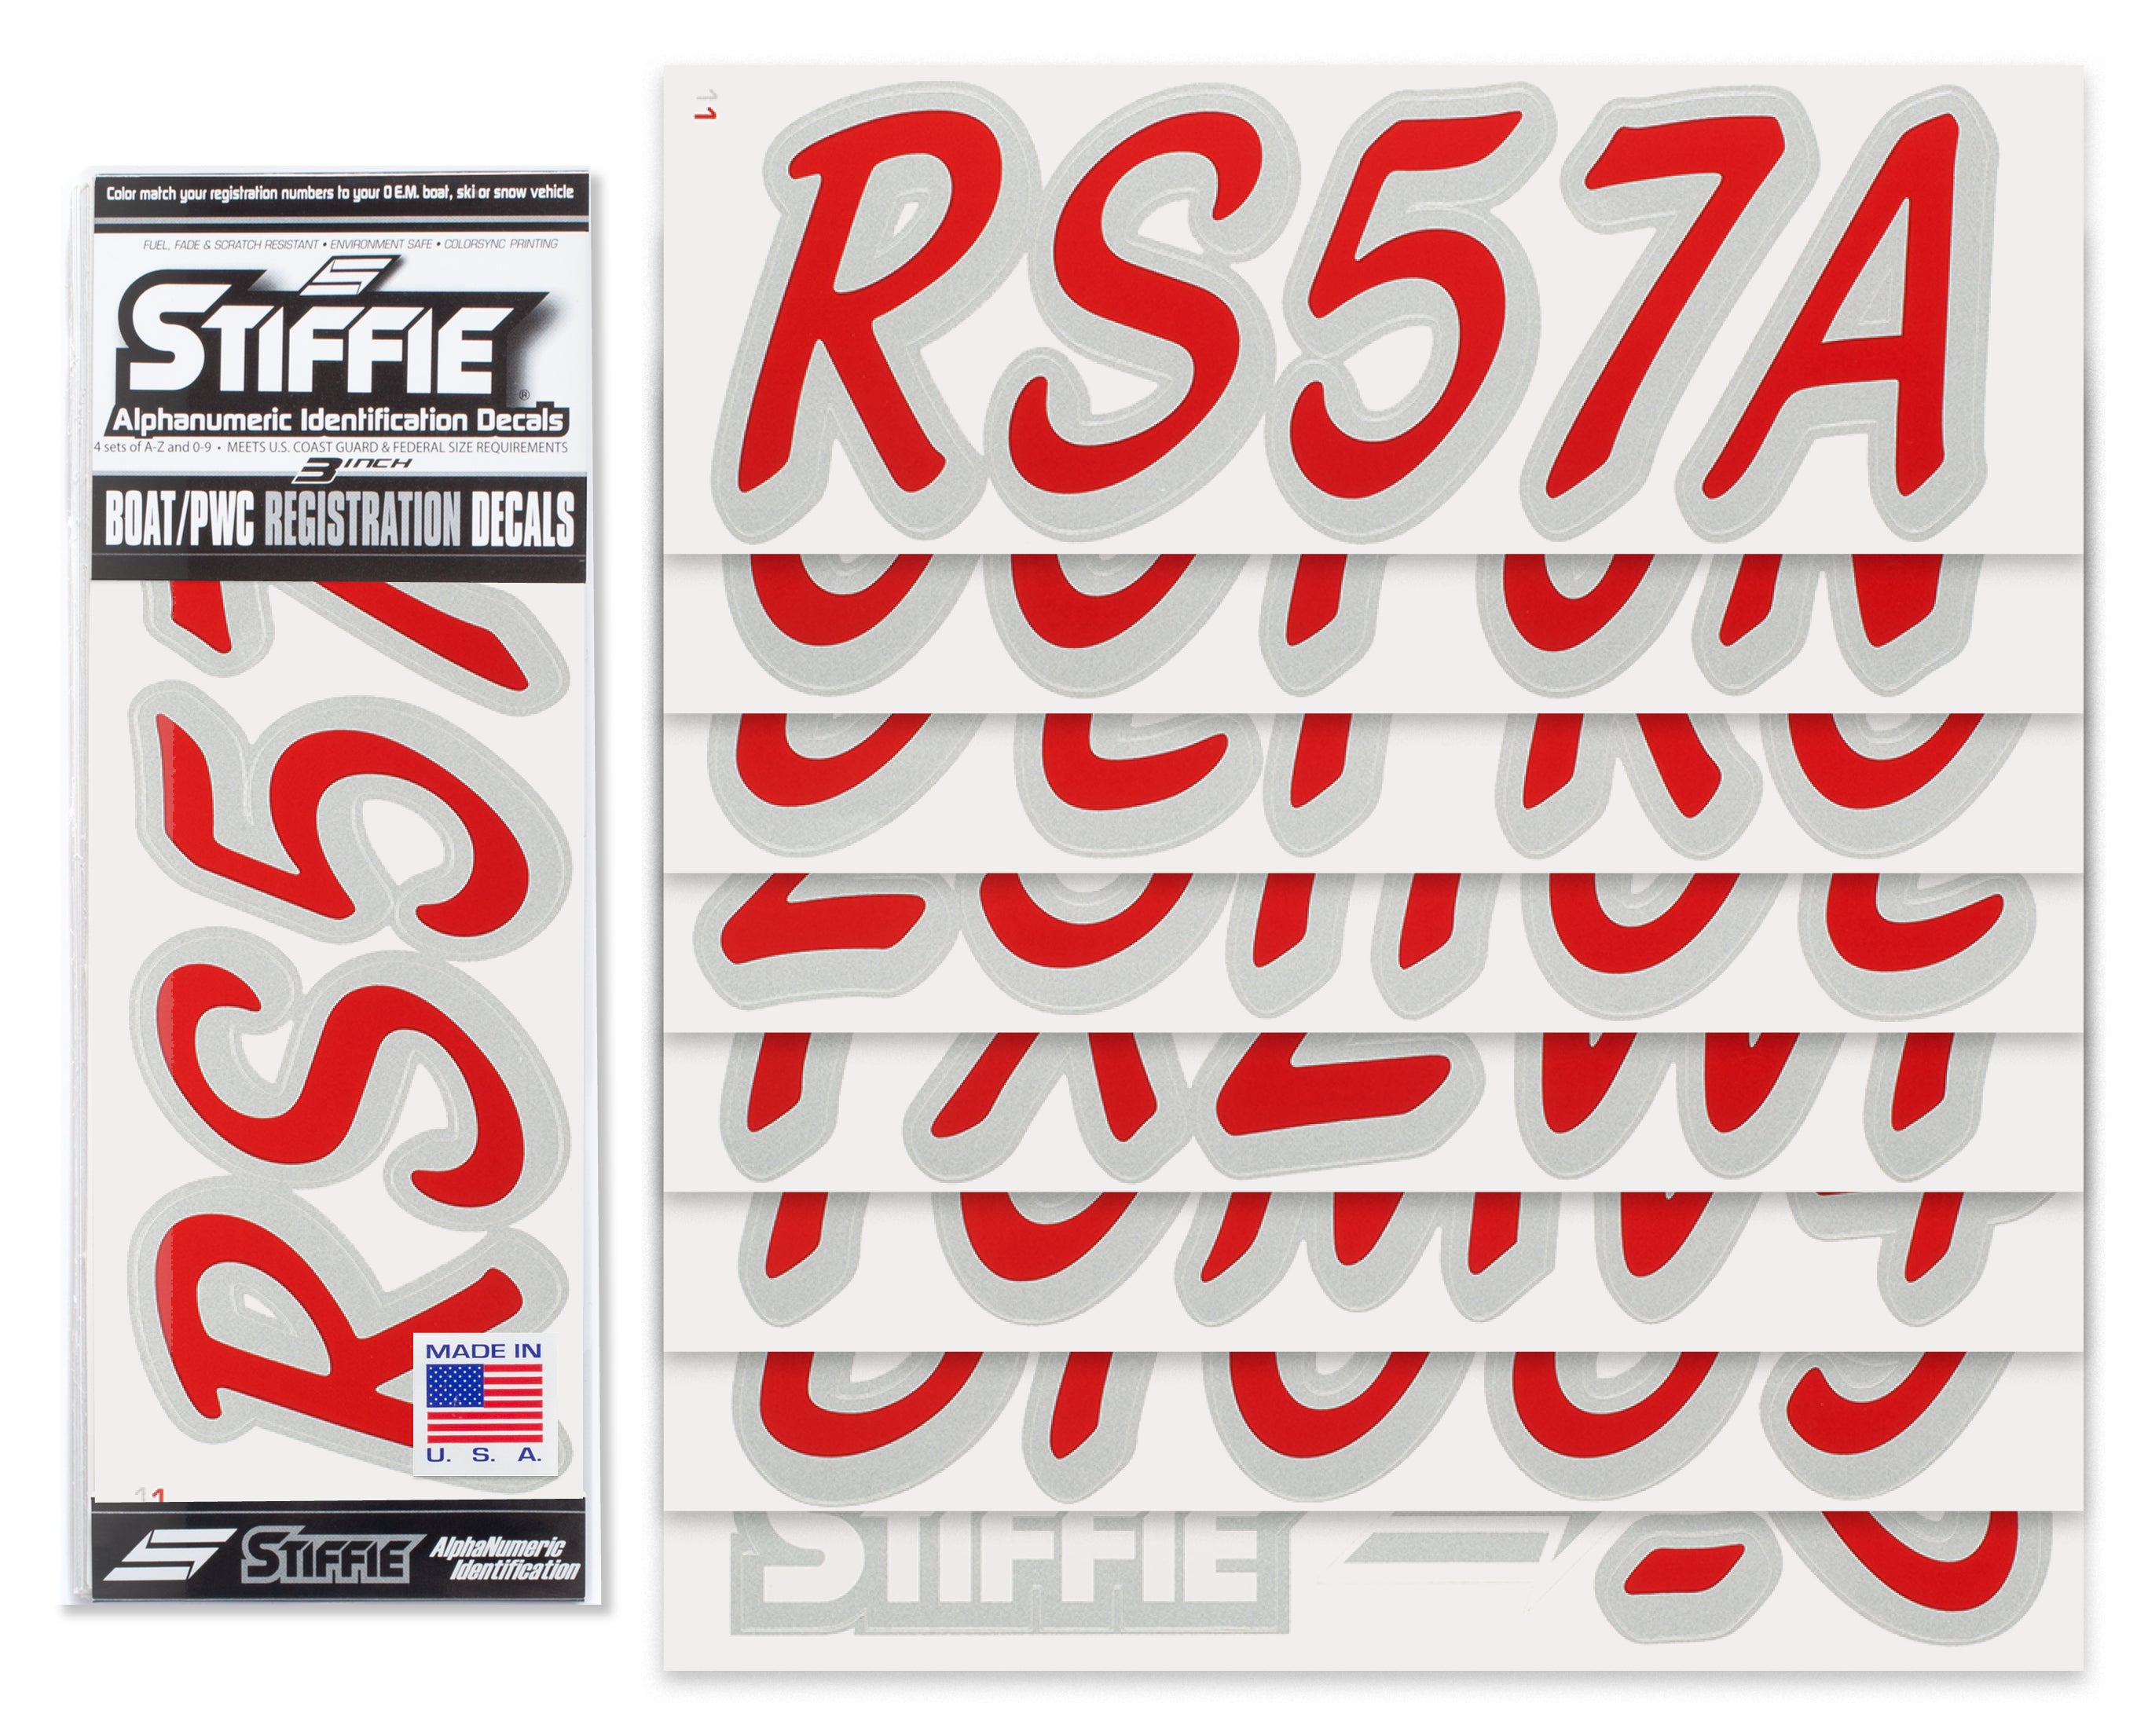 STIFFIE Whipline Solid Red/Metallic Silver 3" Alpha-Numeric Registration Identification Numbers Stickers Decals for Boats & Personal Watercraft